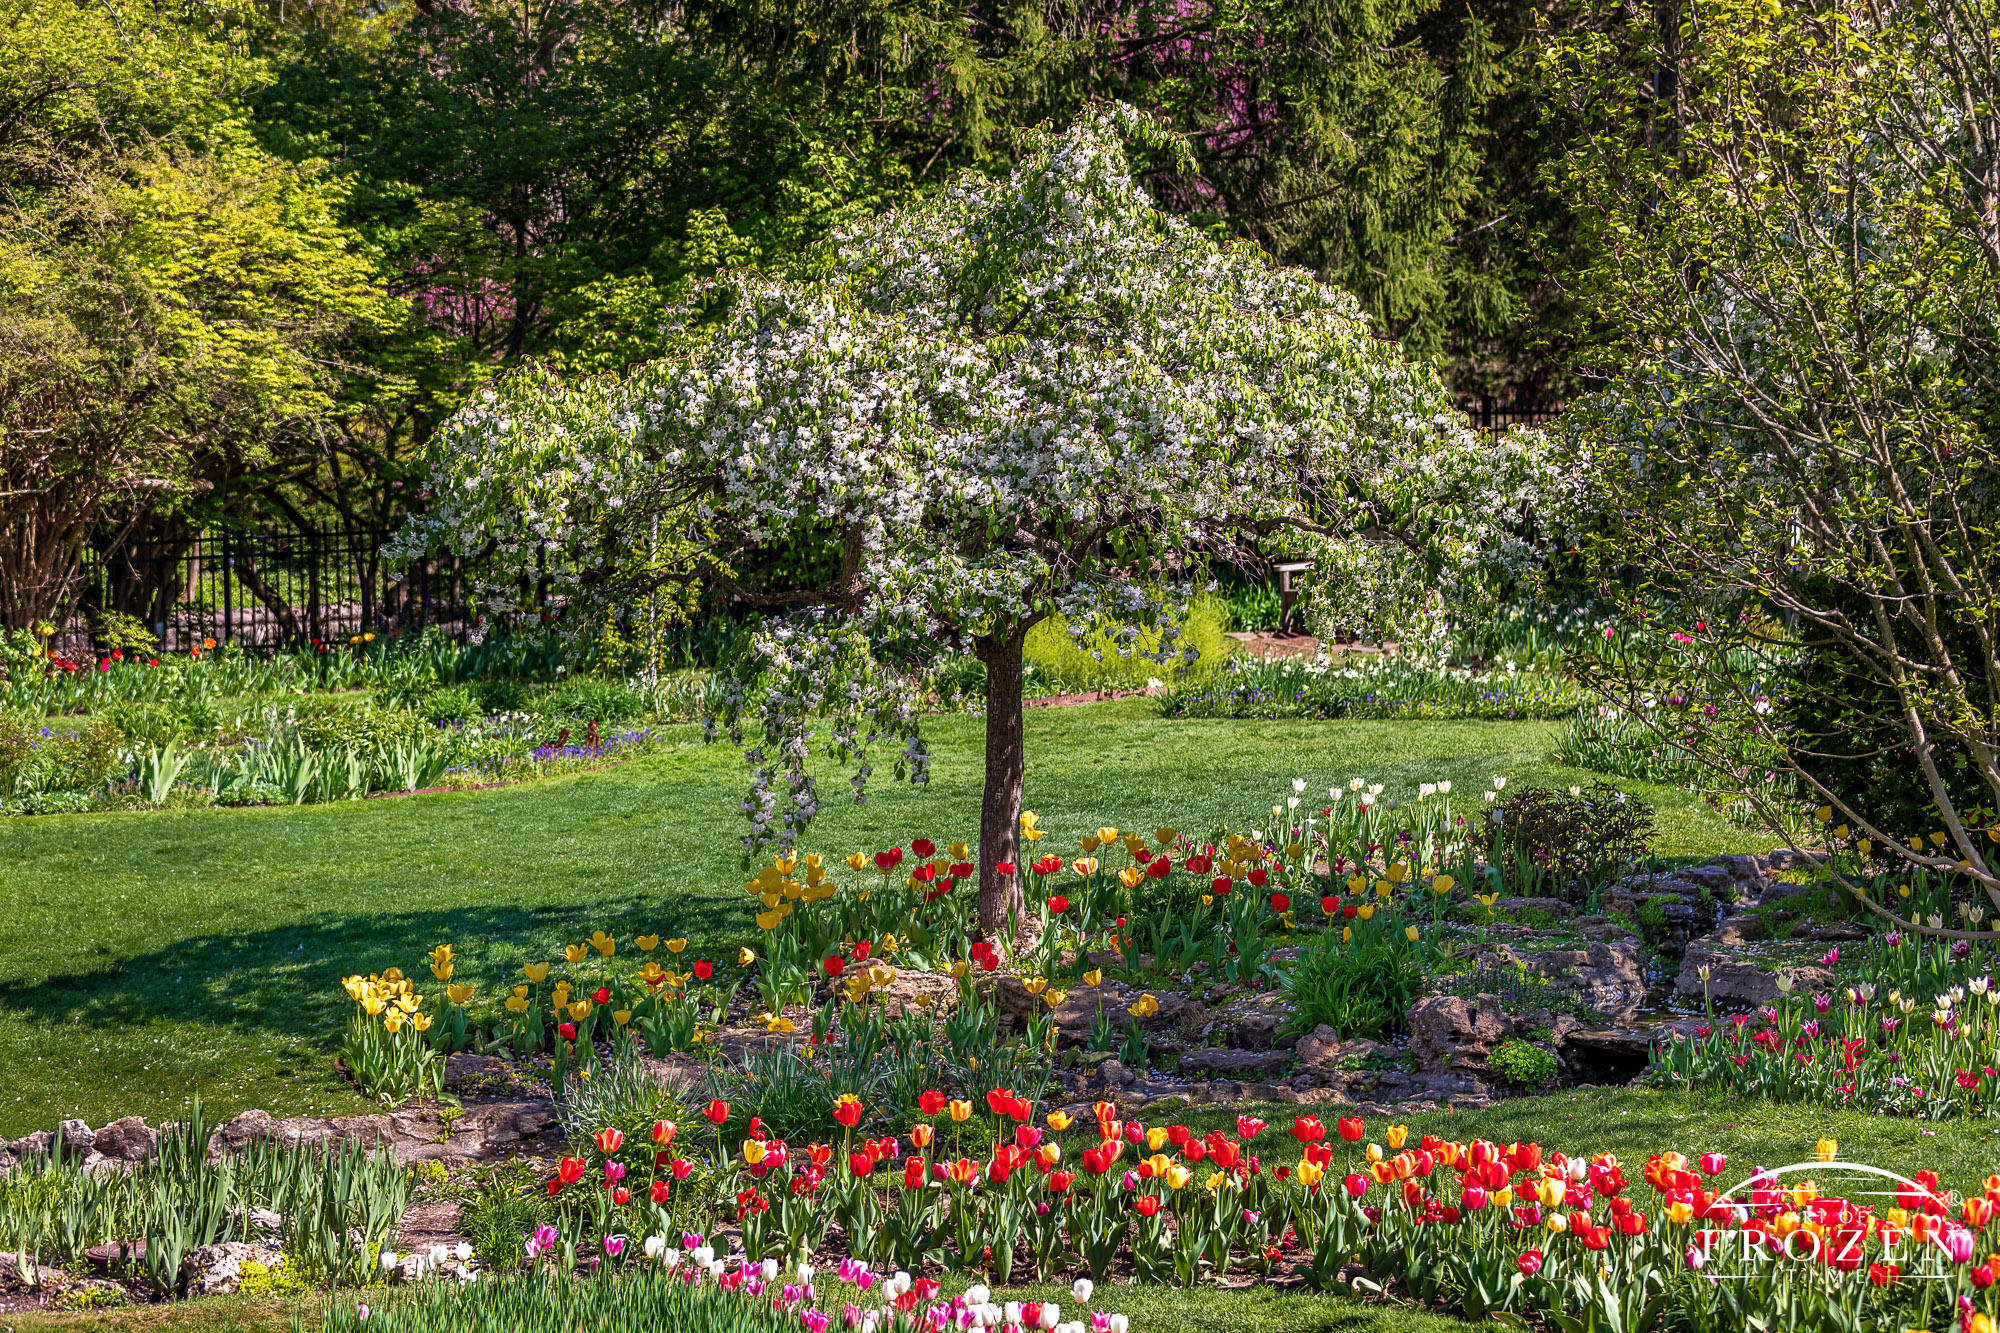 Flowerbeds of tulips stretch all over Oakwood Ohio’s Smith Memorial Gardens under blue skies